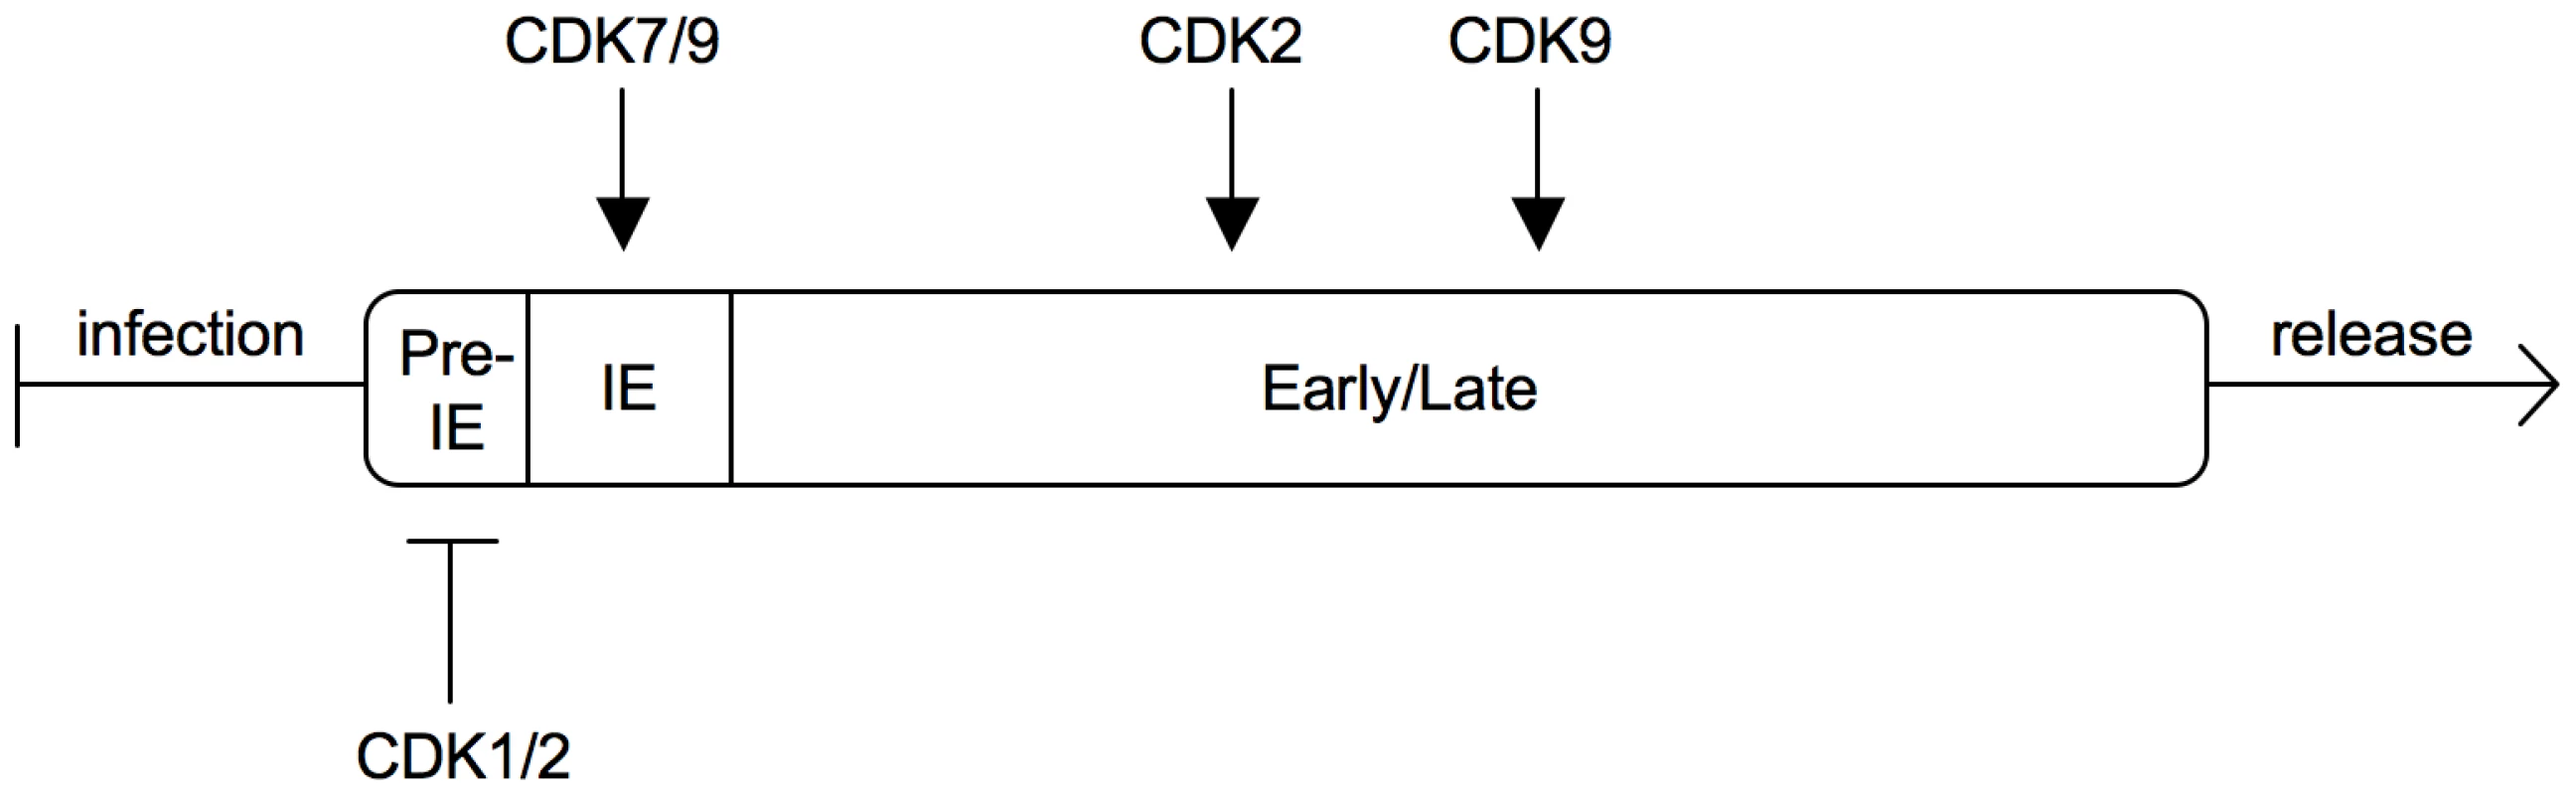 Sequential regulation of the HCMV replication cycle by different CDKs.